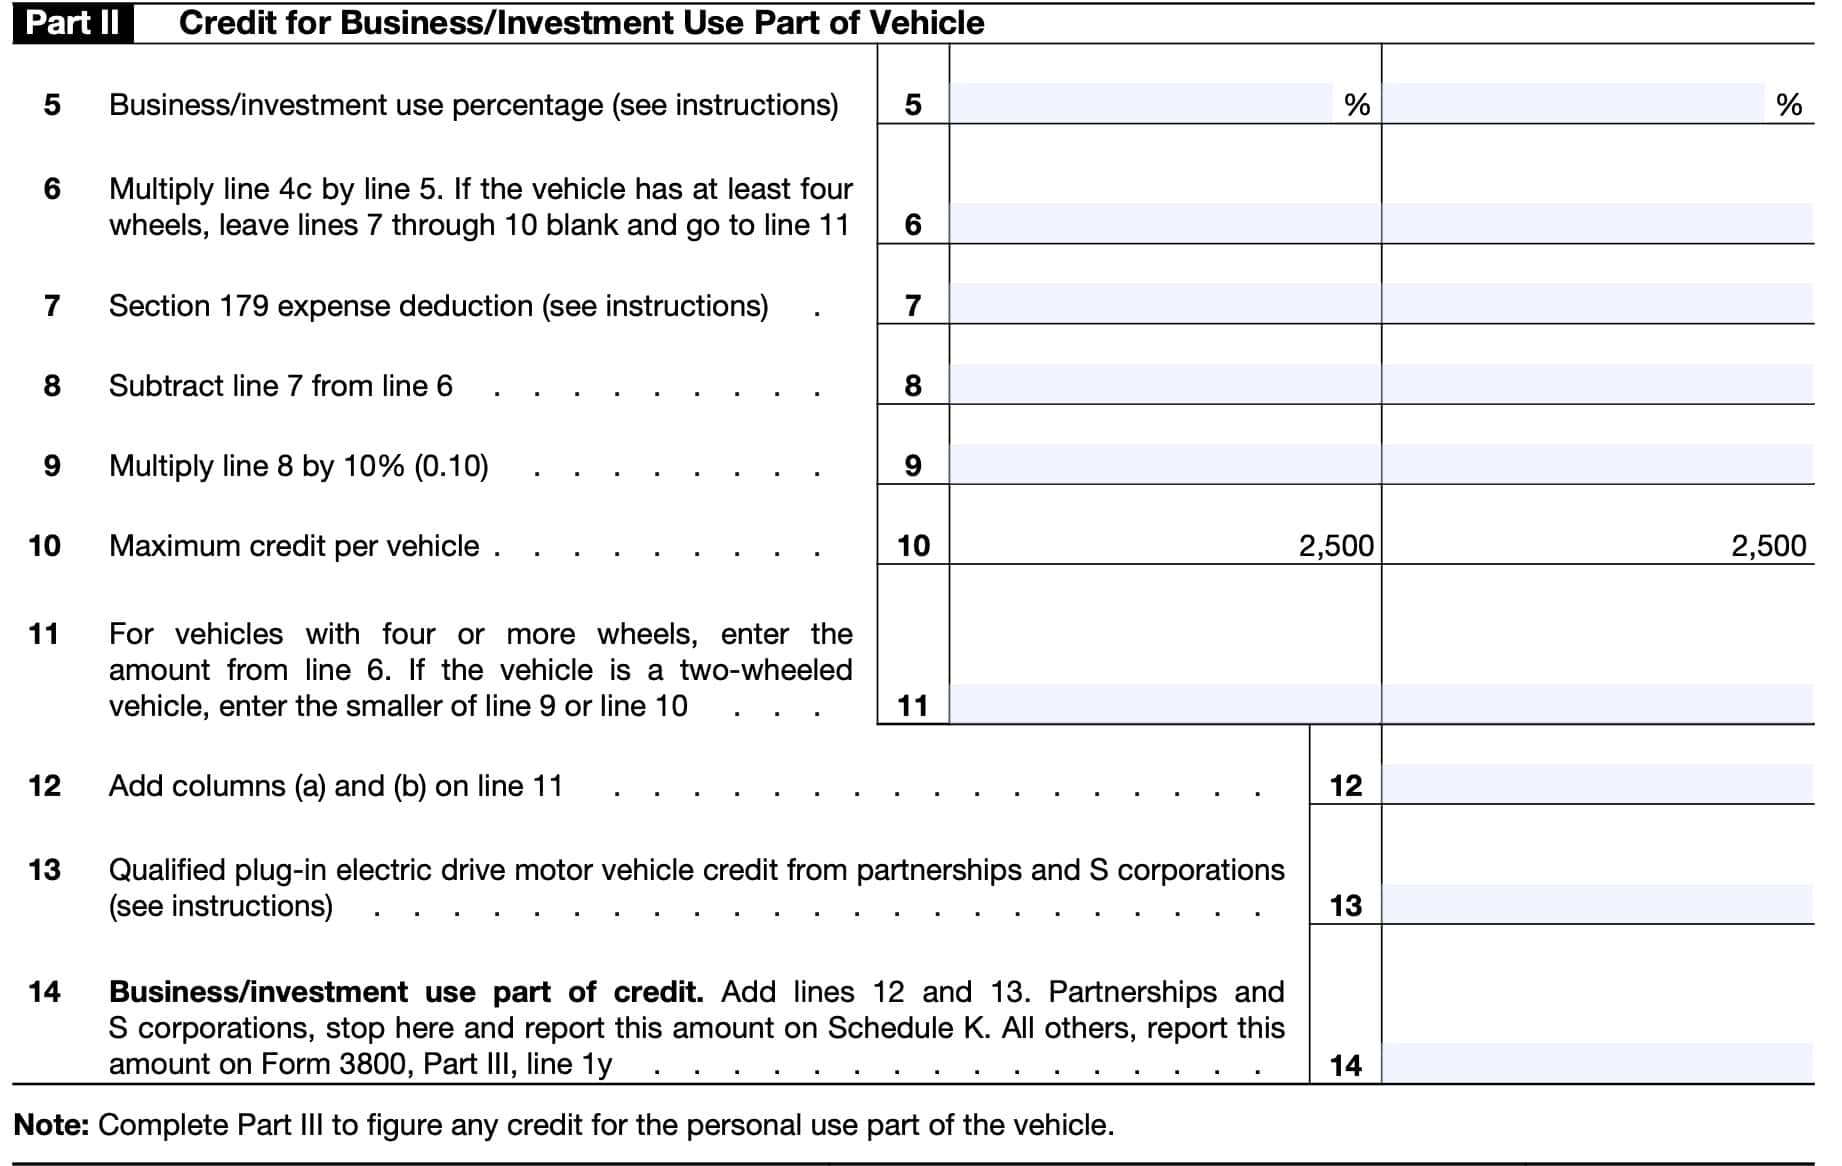 Part ii: credit for business/investment use part of vehicle